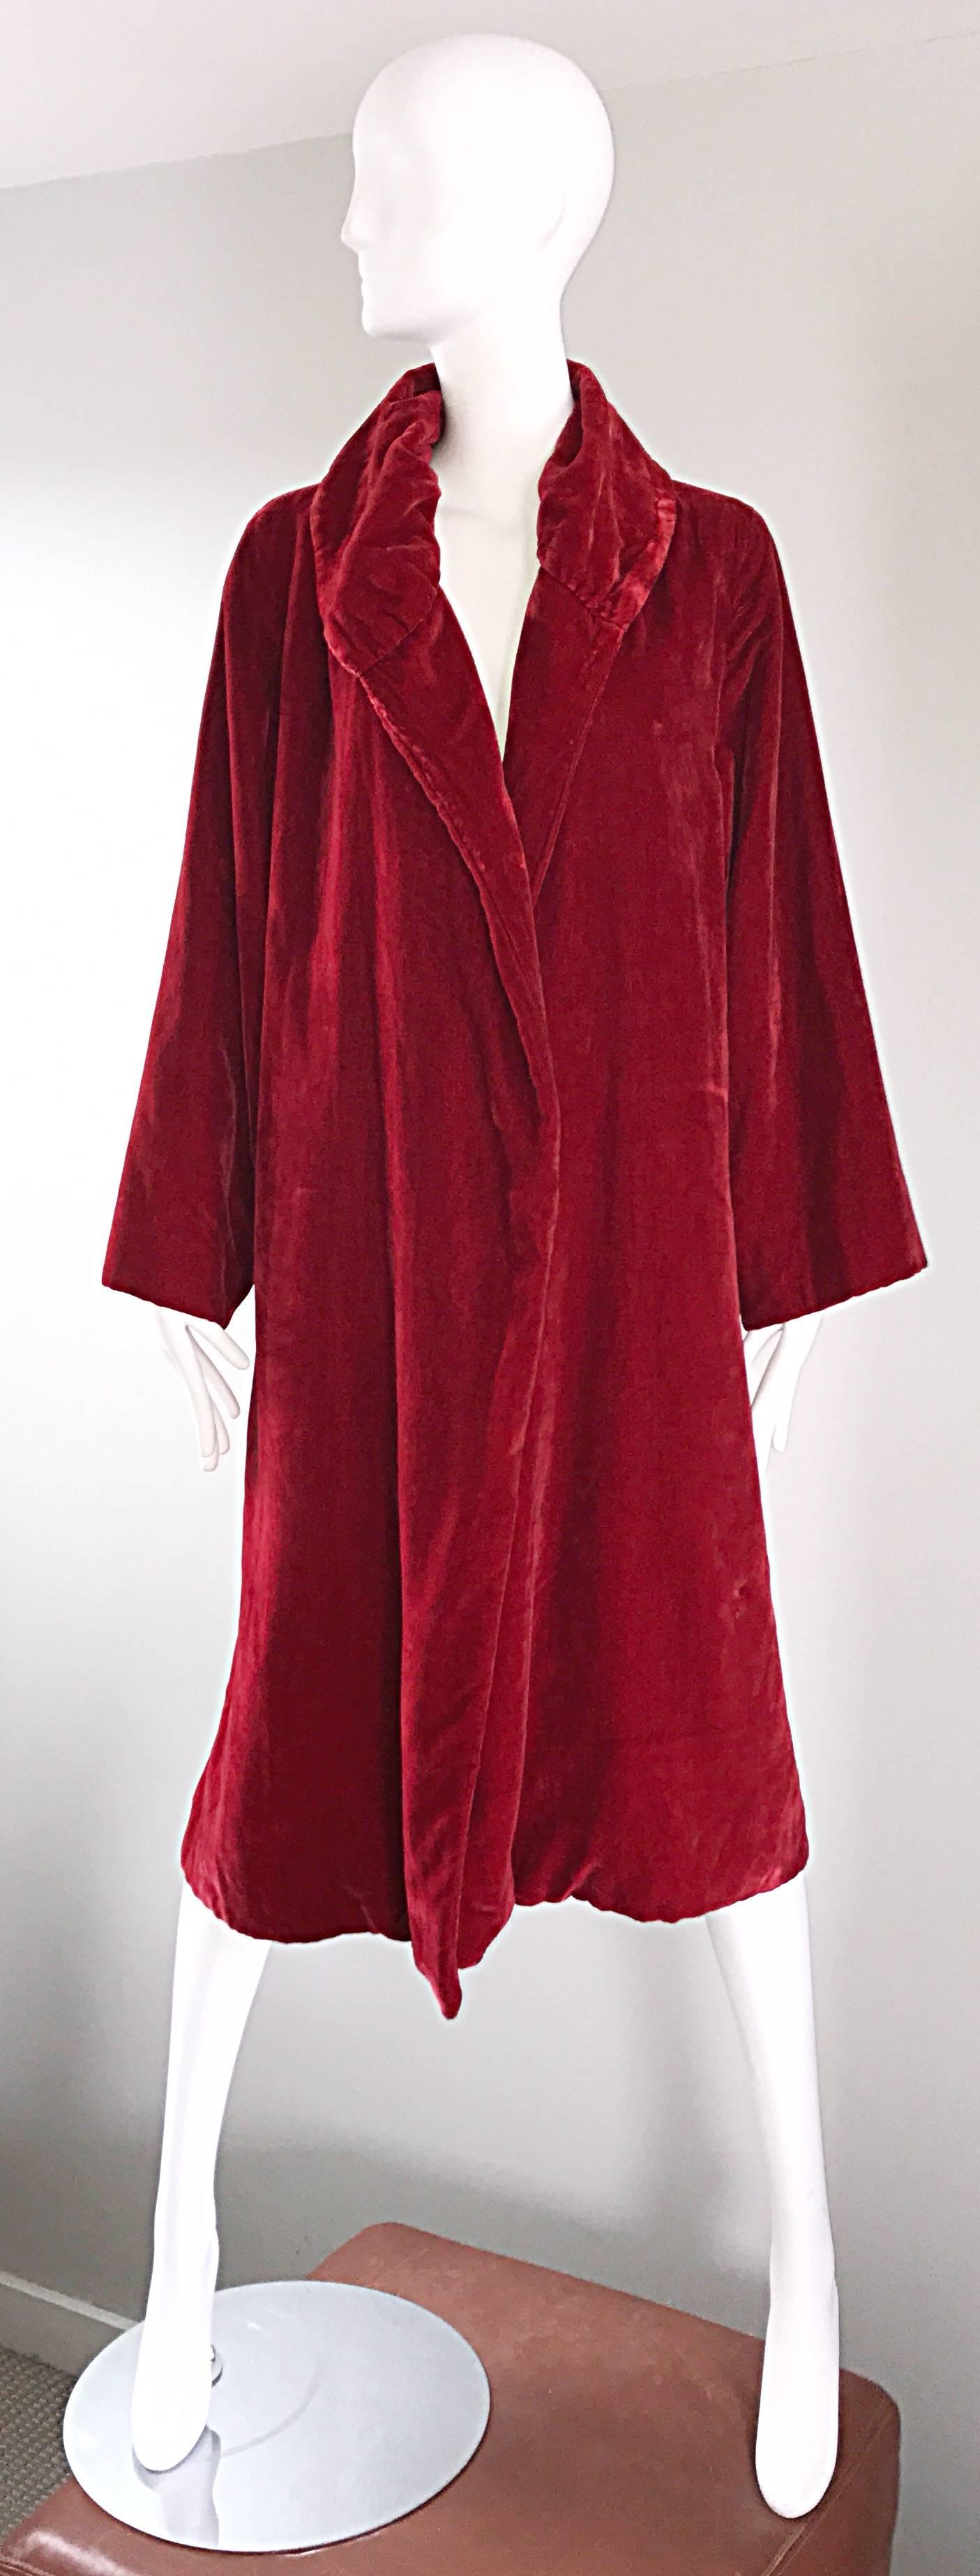 Luxurious 1920s blood red silk velvet flapper jacket! This gem features the softest velvet that I have ever felt! Vibrant red color. Intricately pleated detail at the collar. Interior hidden pocket. Looks great with jeans, or over a dress. Can also